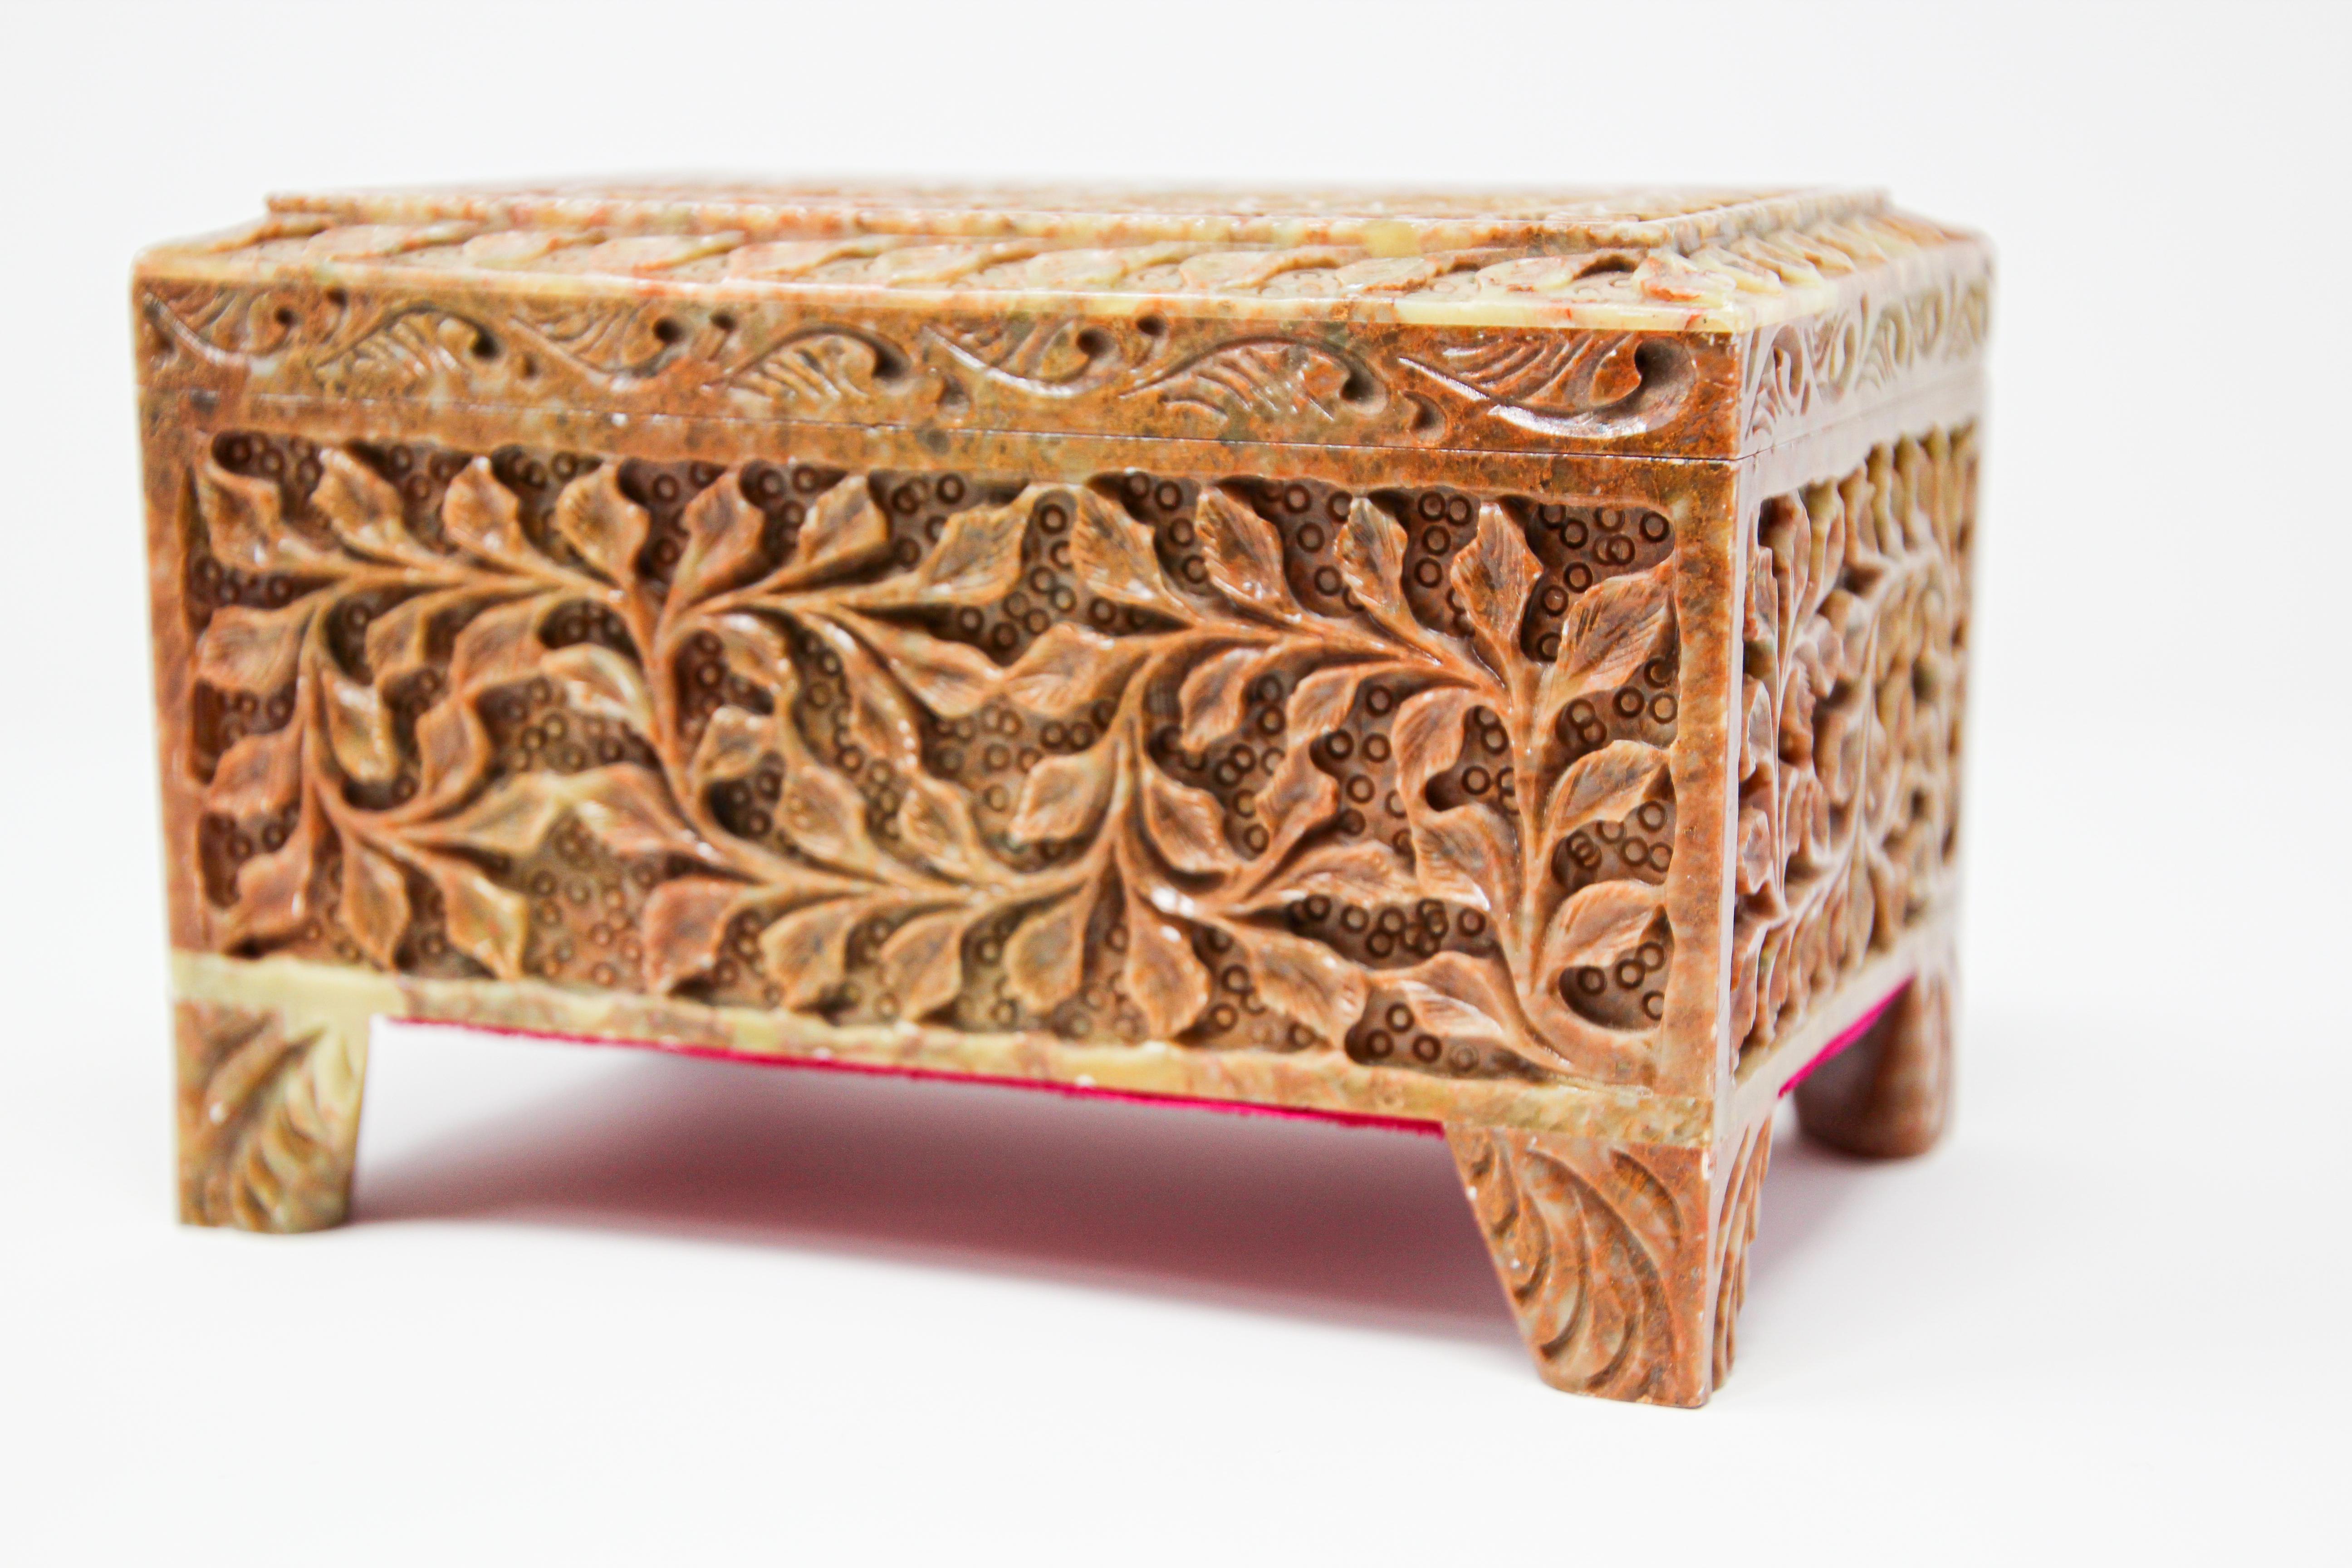 Anglo Raj carved soap stone footed jewelry box..
Handcrafted decorative box with foliage design with soap stone natural jade like colors.
Lined with red velvet.
Very nice fine artwork in the style of Agra, home of the legendary Taj Mahal.
Box